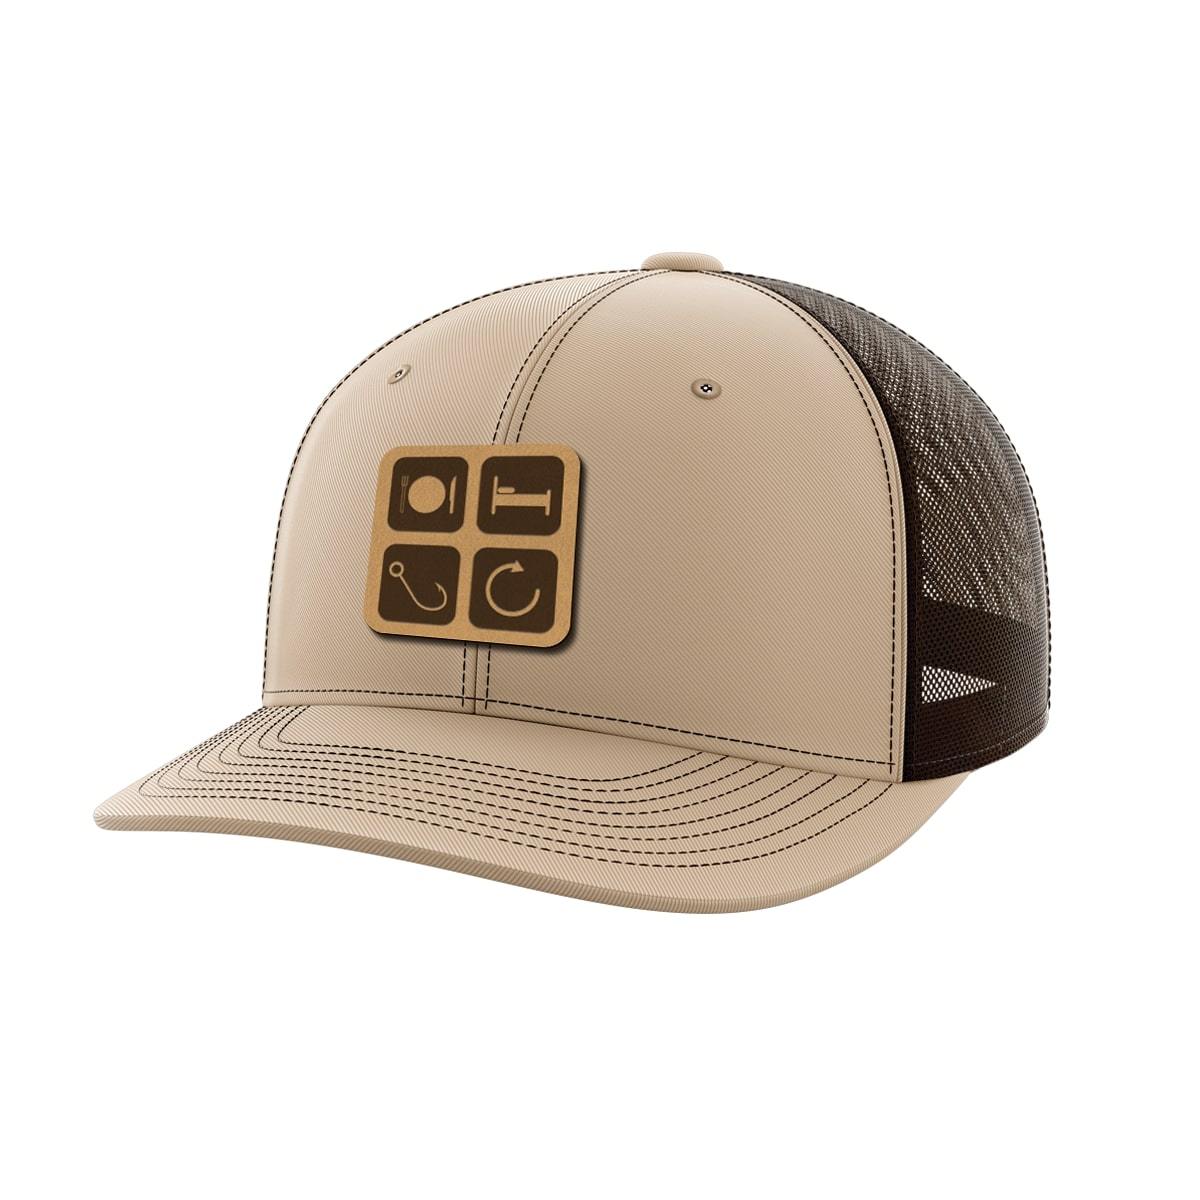 Eat Sleep Fish Repeat Leather Patch Hat - Greater Half